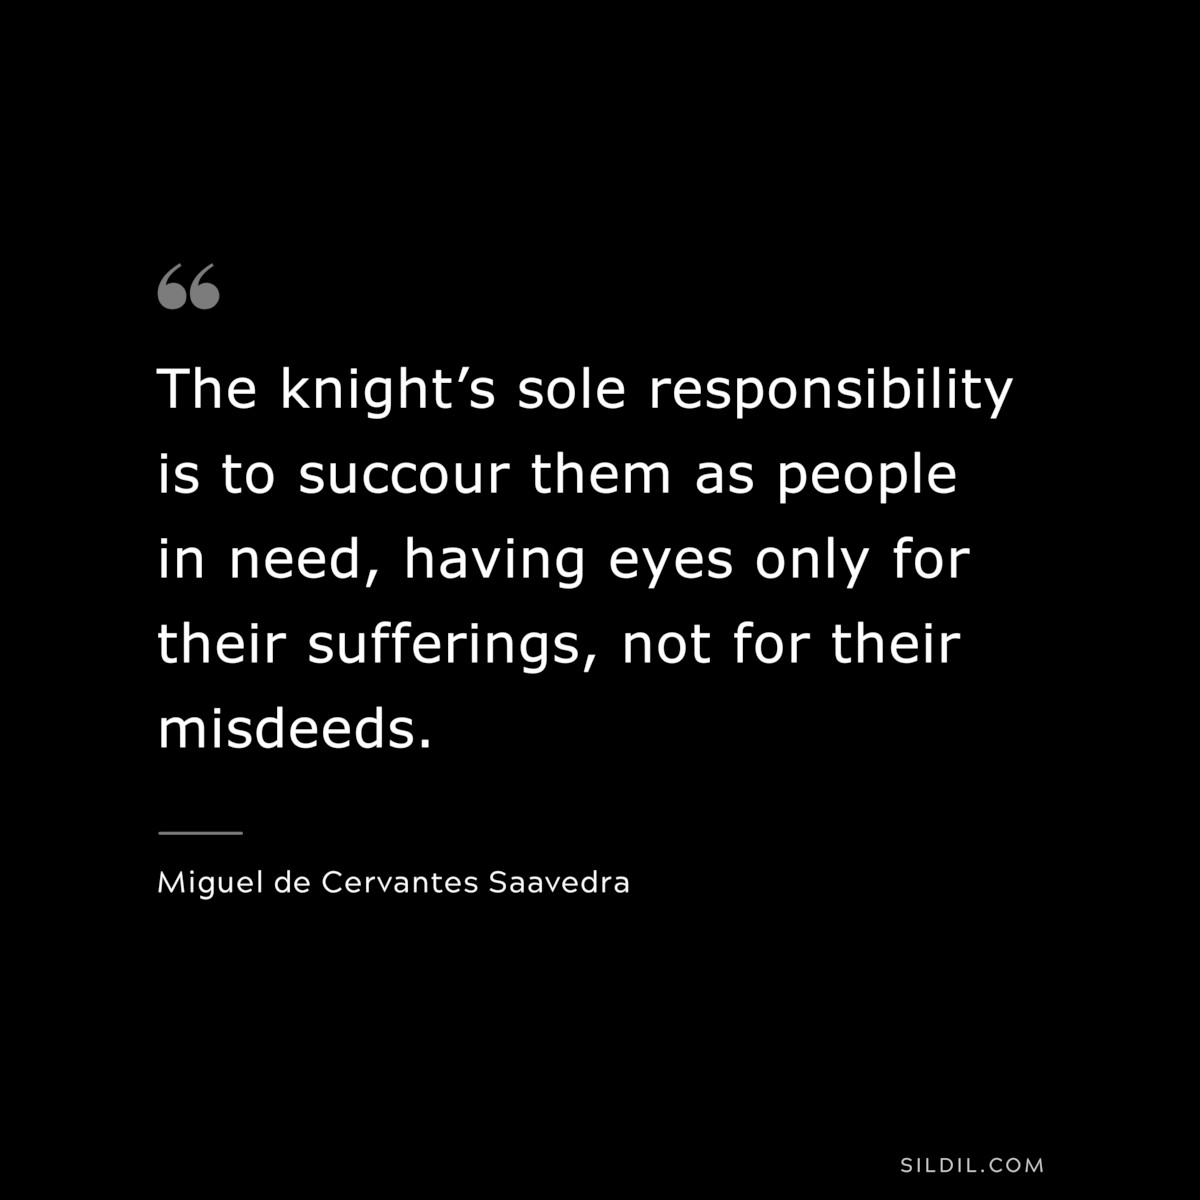 The knight’s sole responsibility is to succour them as people in need, having eyes only for their sufferings, not for their misdeeds. ― Miguel de Cervantes Saavedra